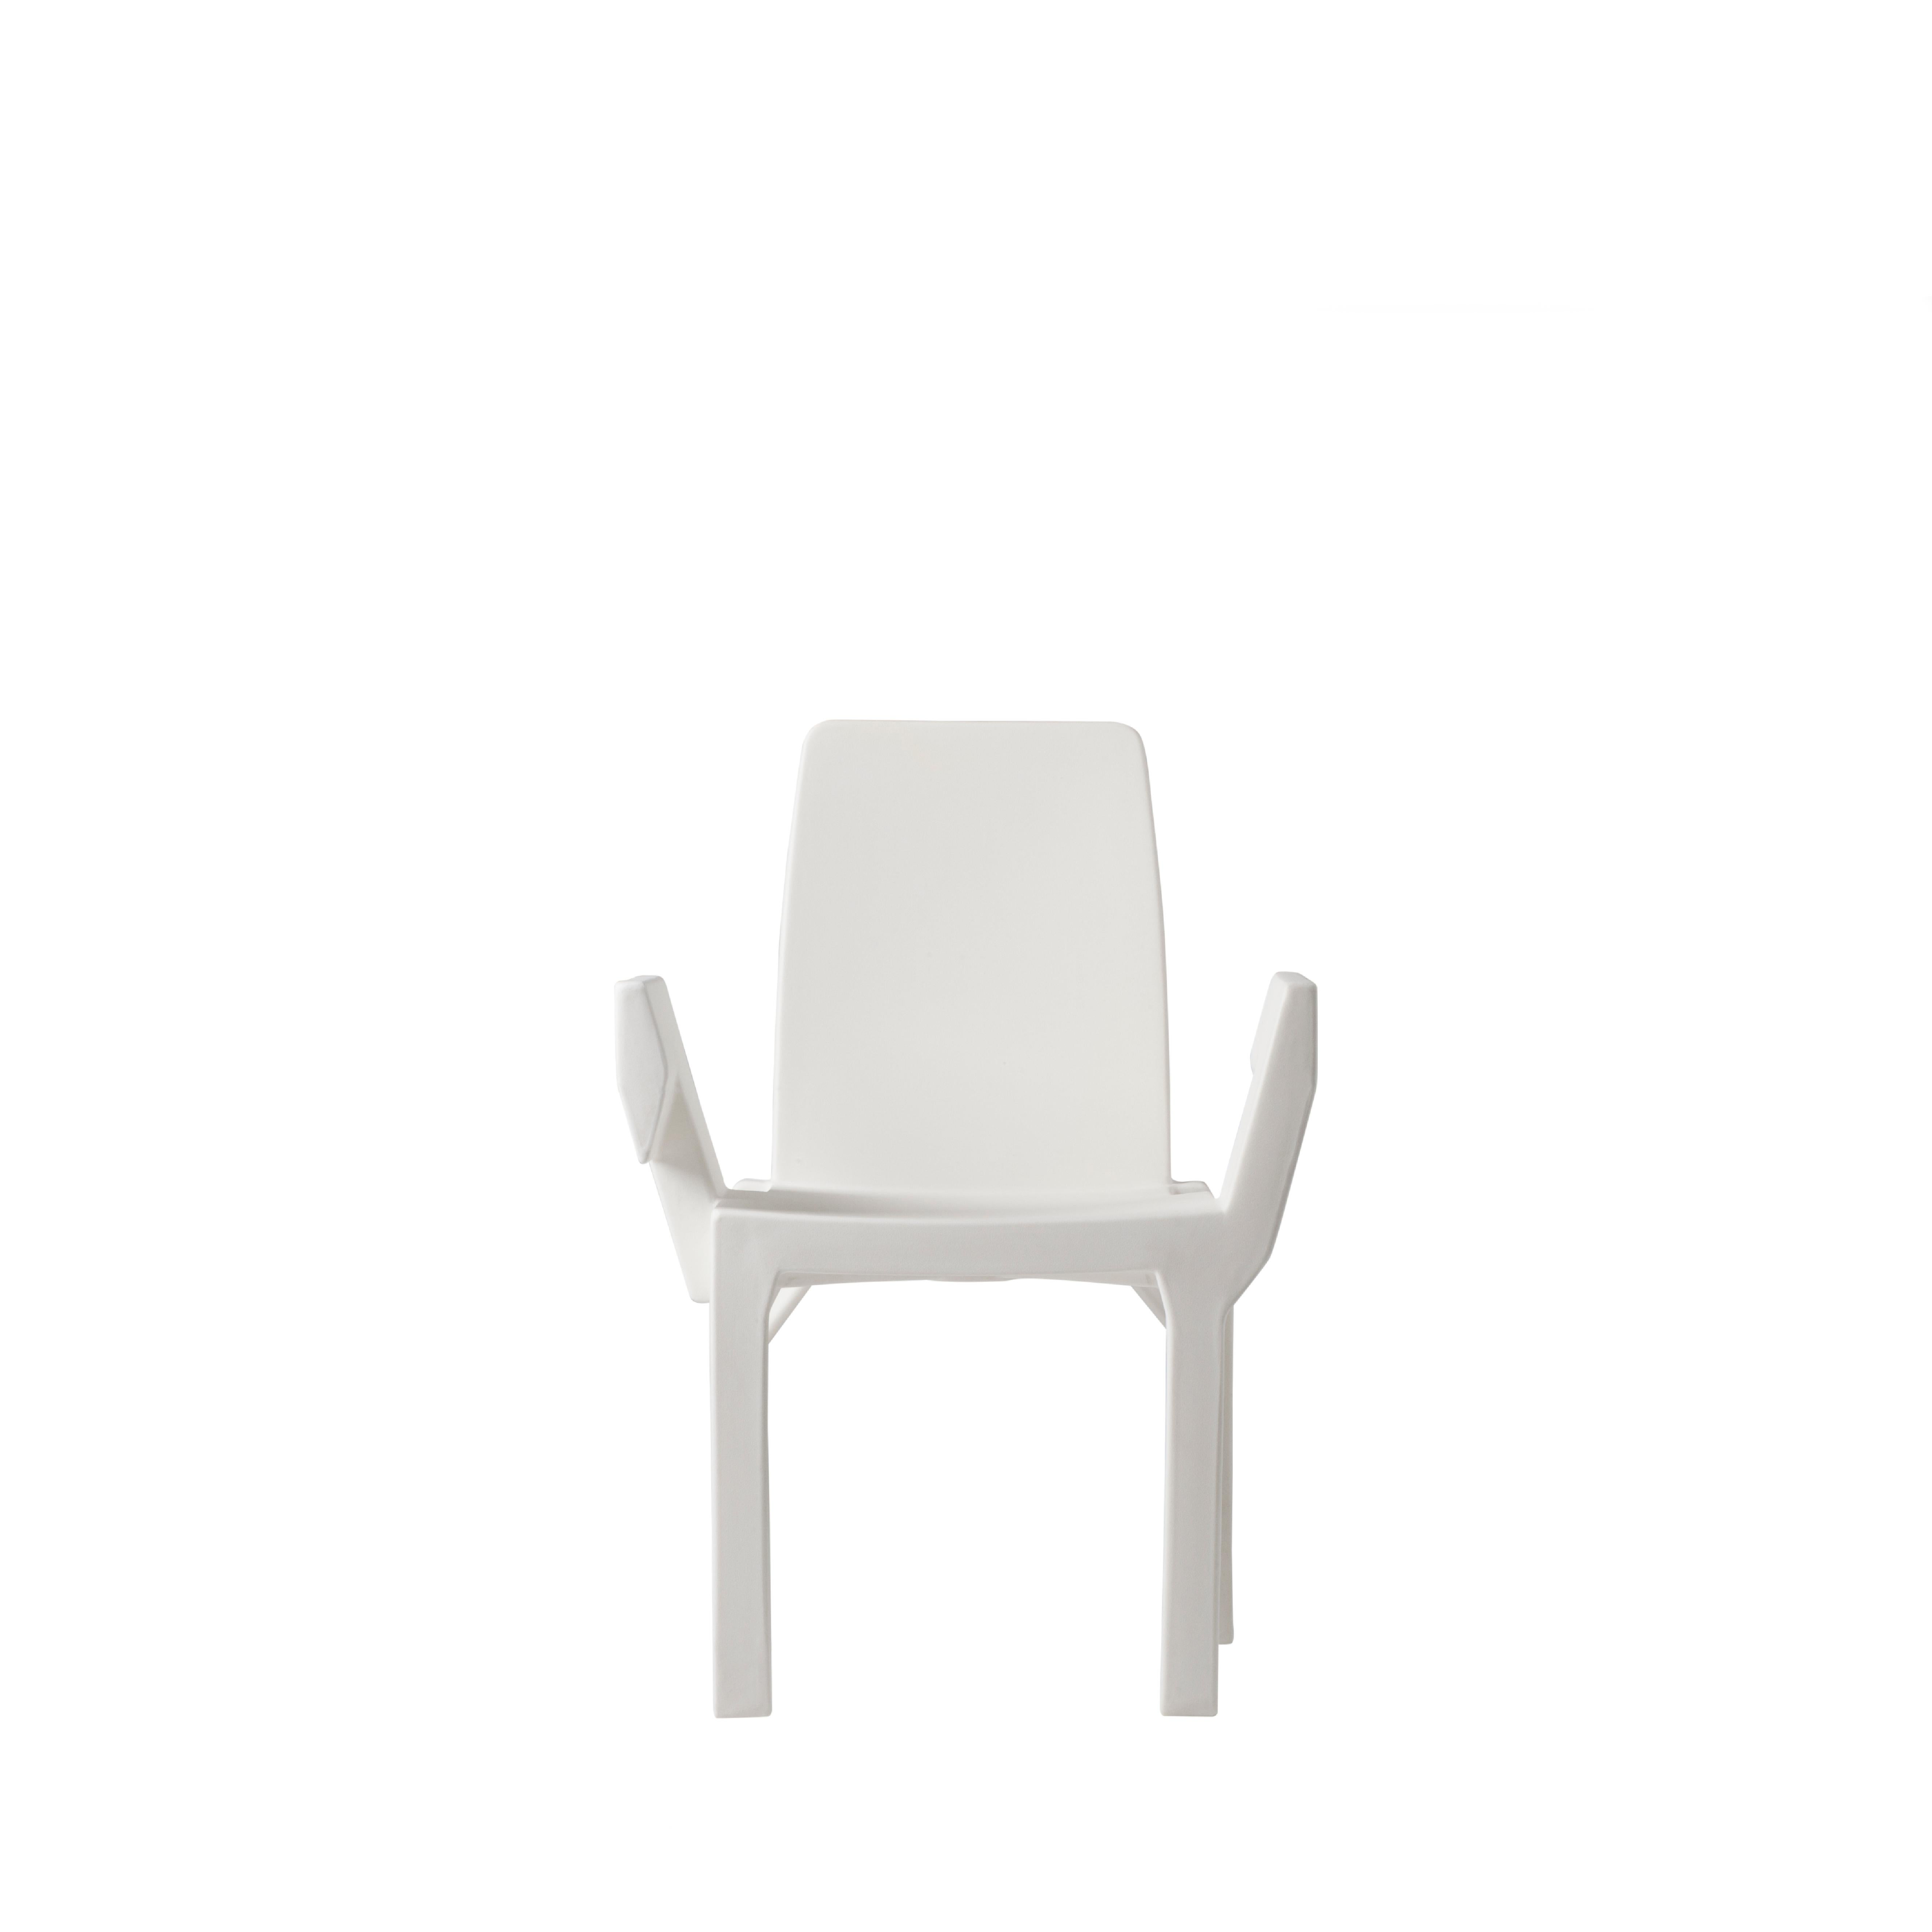 Other Milky White Doublix Chair by Stirum Design For Sale